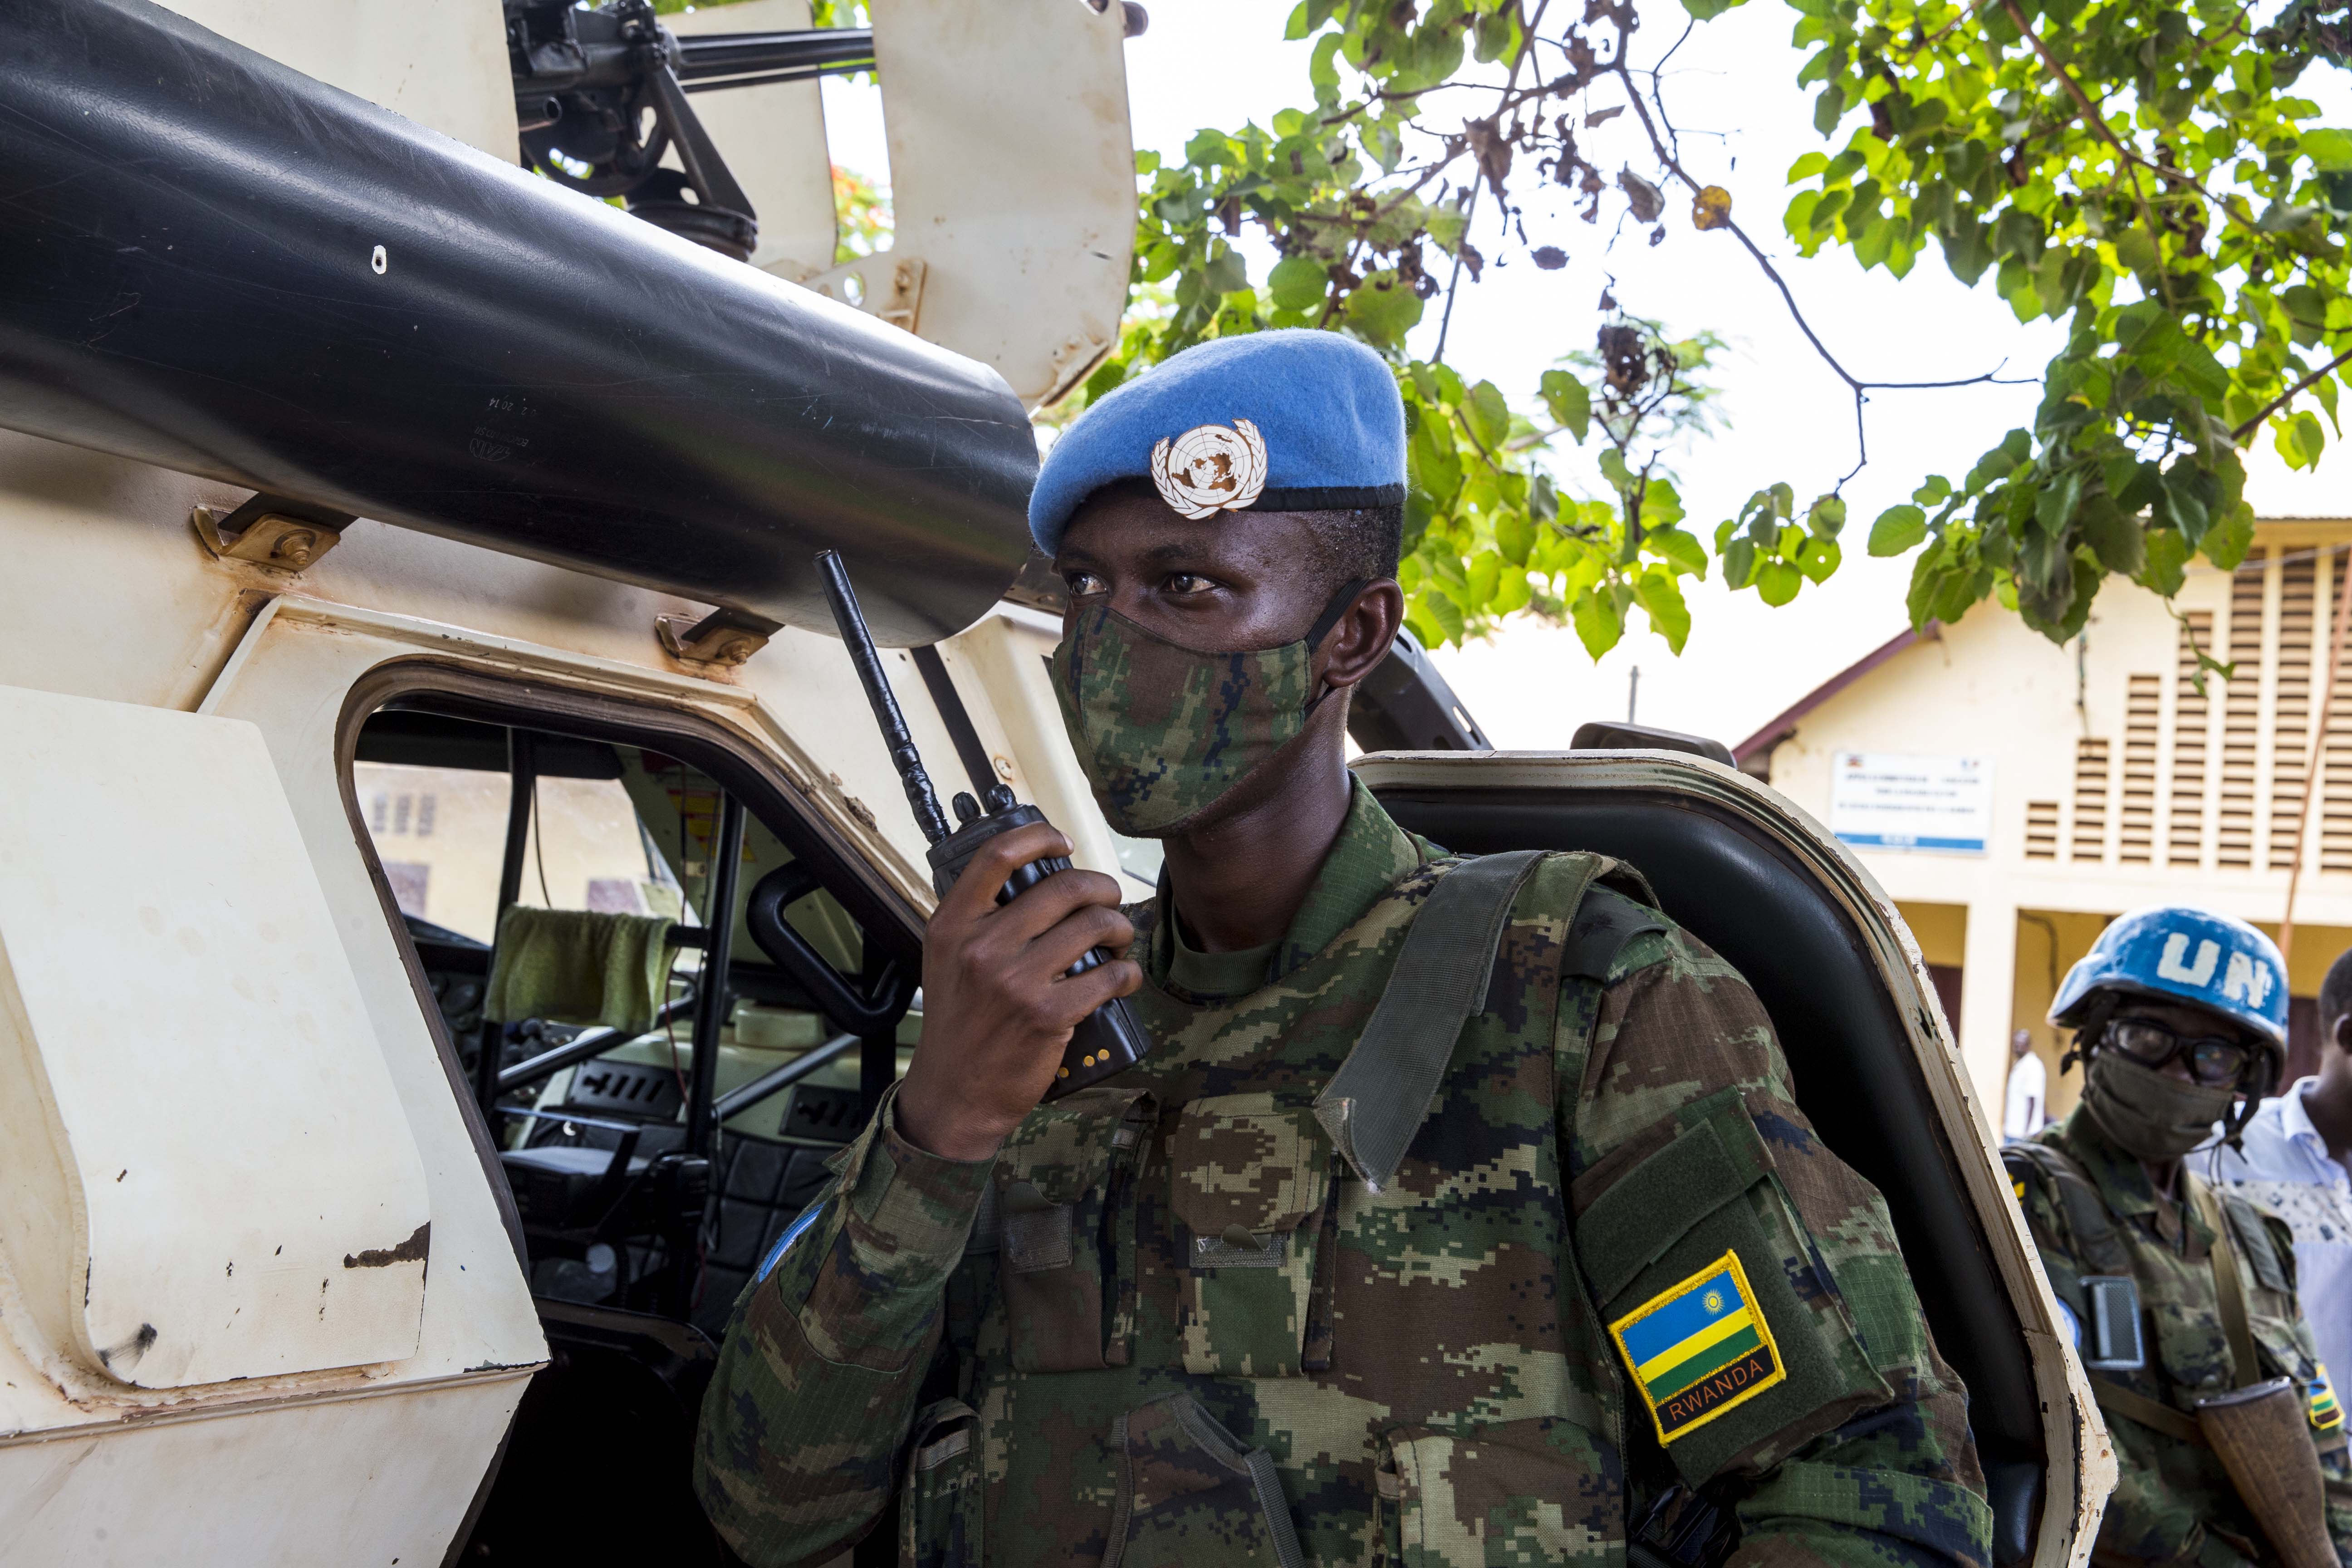 Strengthening the conduct of peacekeeping personnel, by UN Peacekeeping, We The Peoples